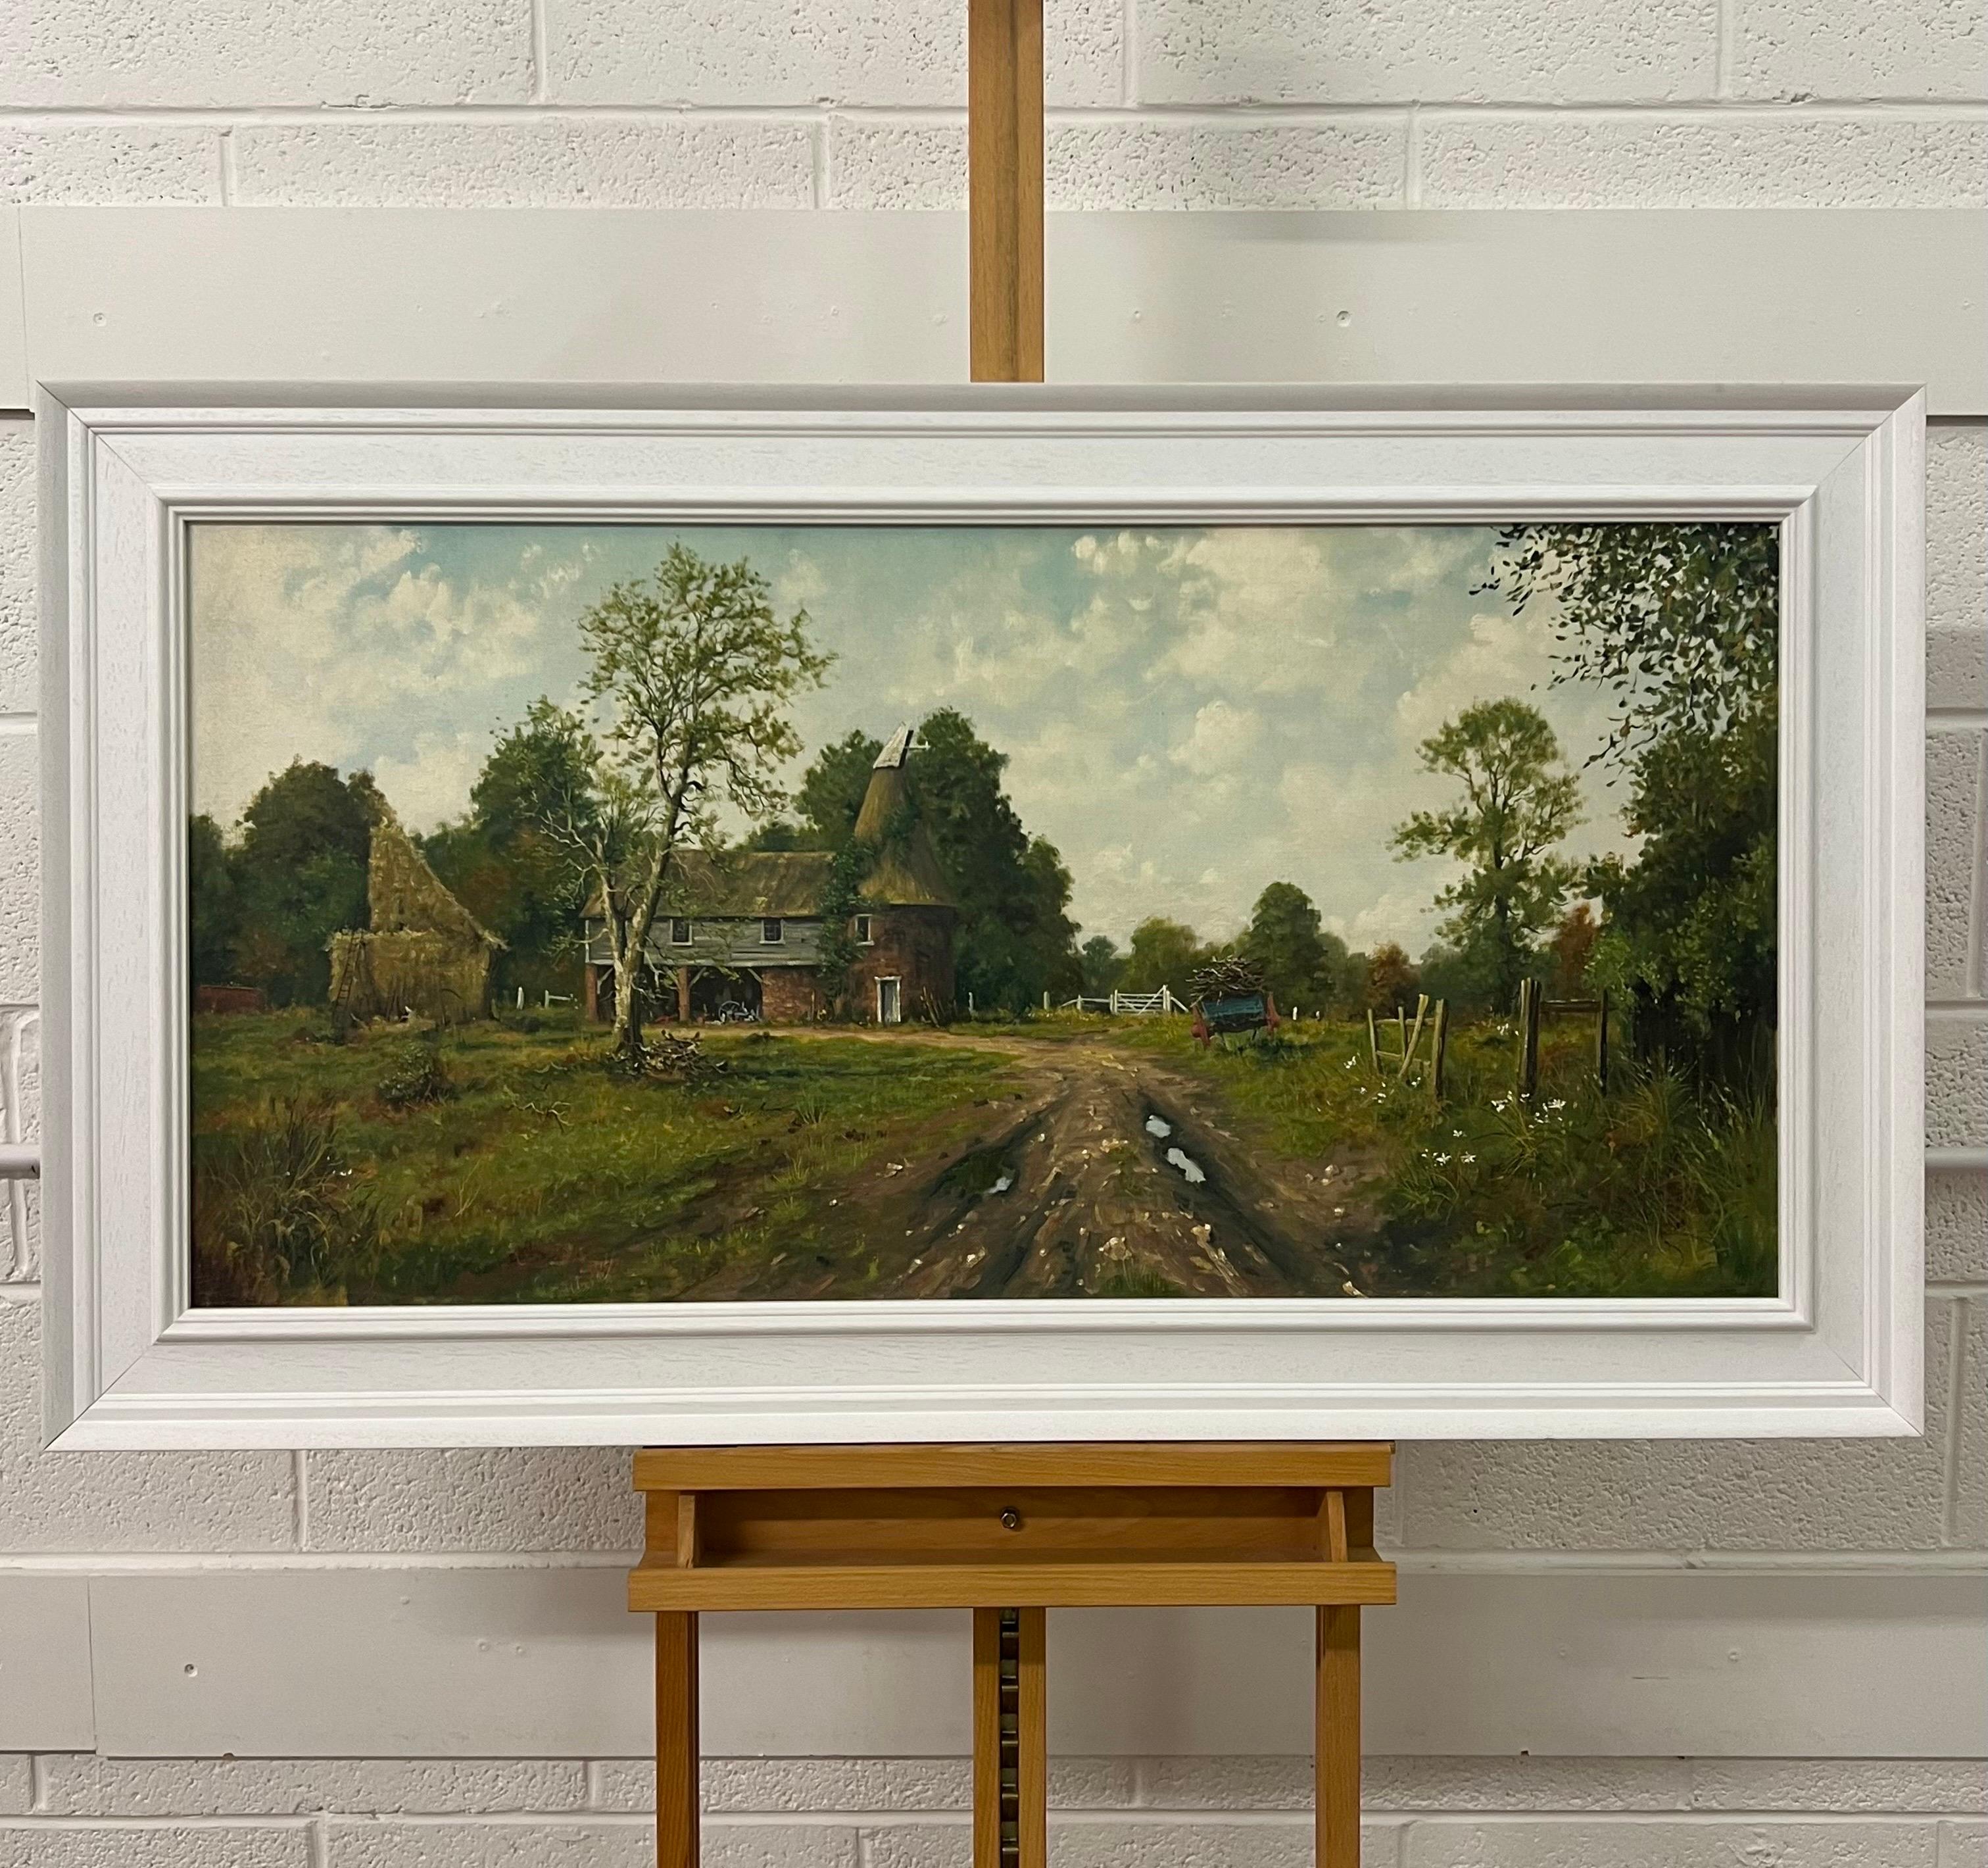 Large Painting of a Farm Scene with an Oast House in the English Countryside by British Landscape Artist, James Wright.

Signed, vintage original, oil on canvas, reframed in a high quality contemporary white wooden moulding. 

Art measures 40 x 20